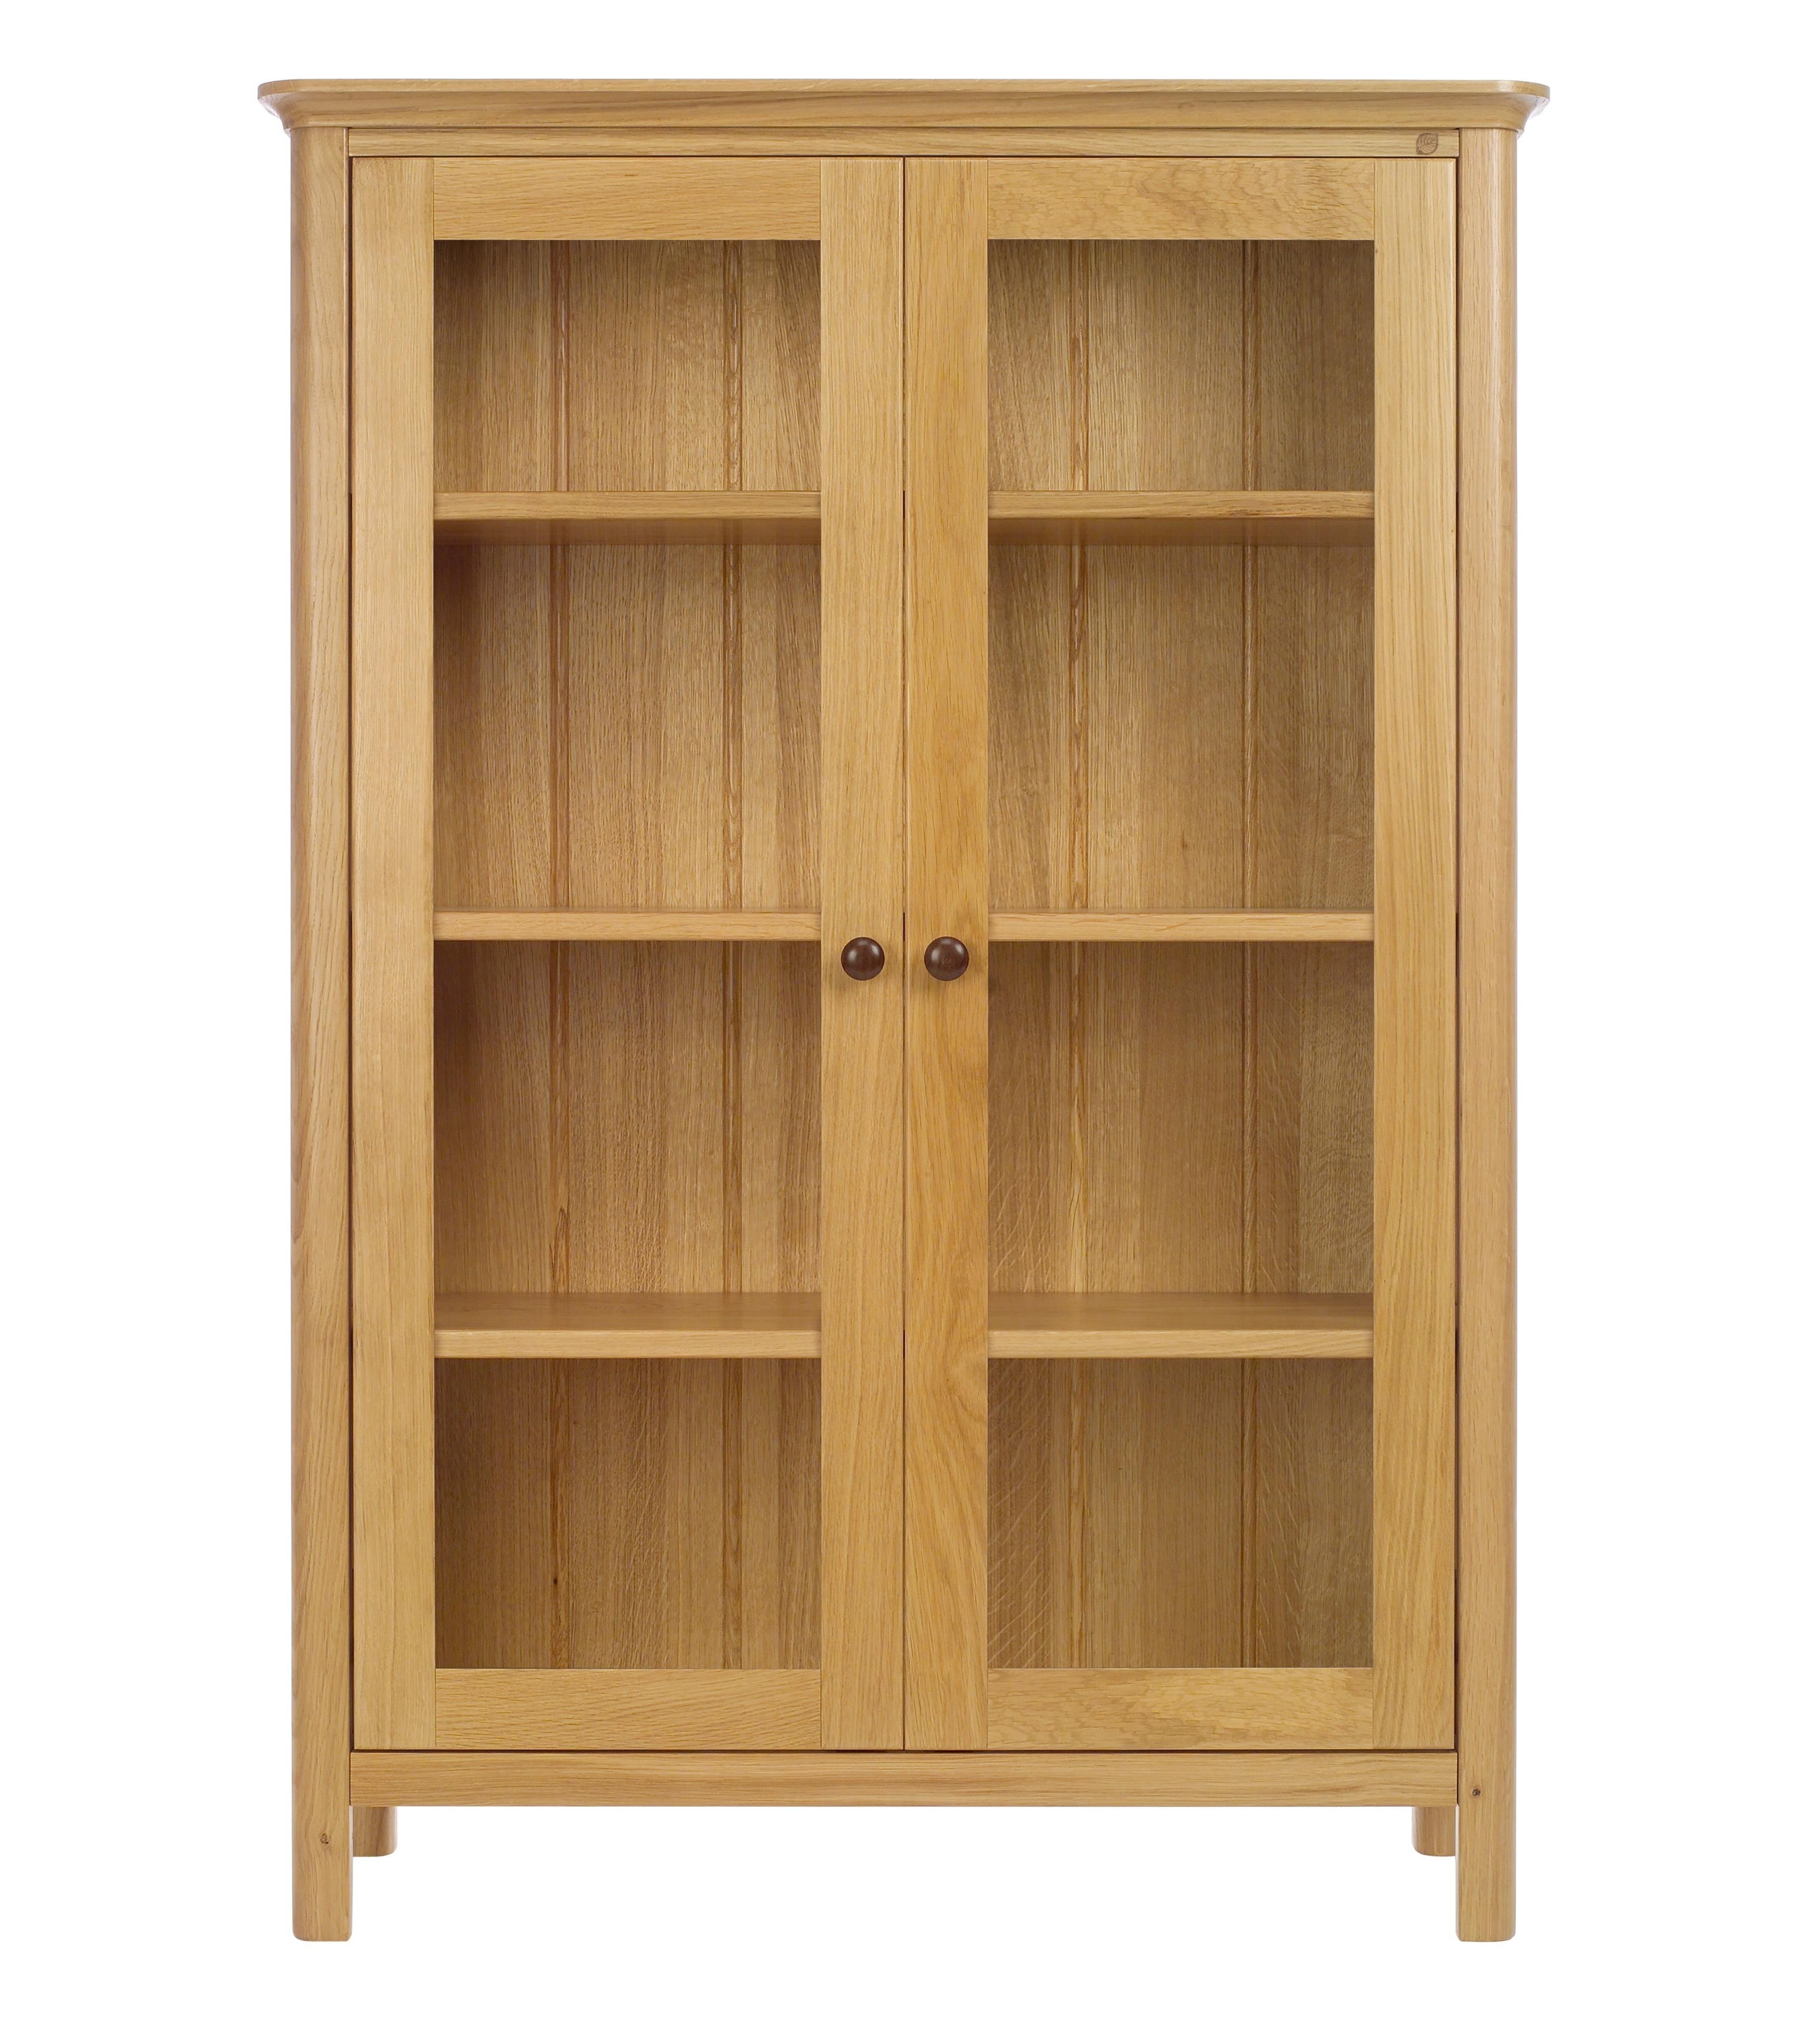 Oak Glazed Bookcases With Regard To Best And Newest Oak Bookcases With Doors, Oak Bookshelves With Glass Doors Small (View 6 of 15)